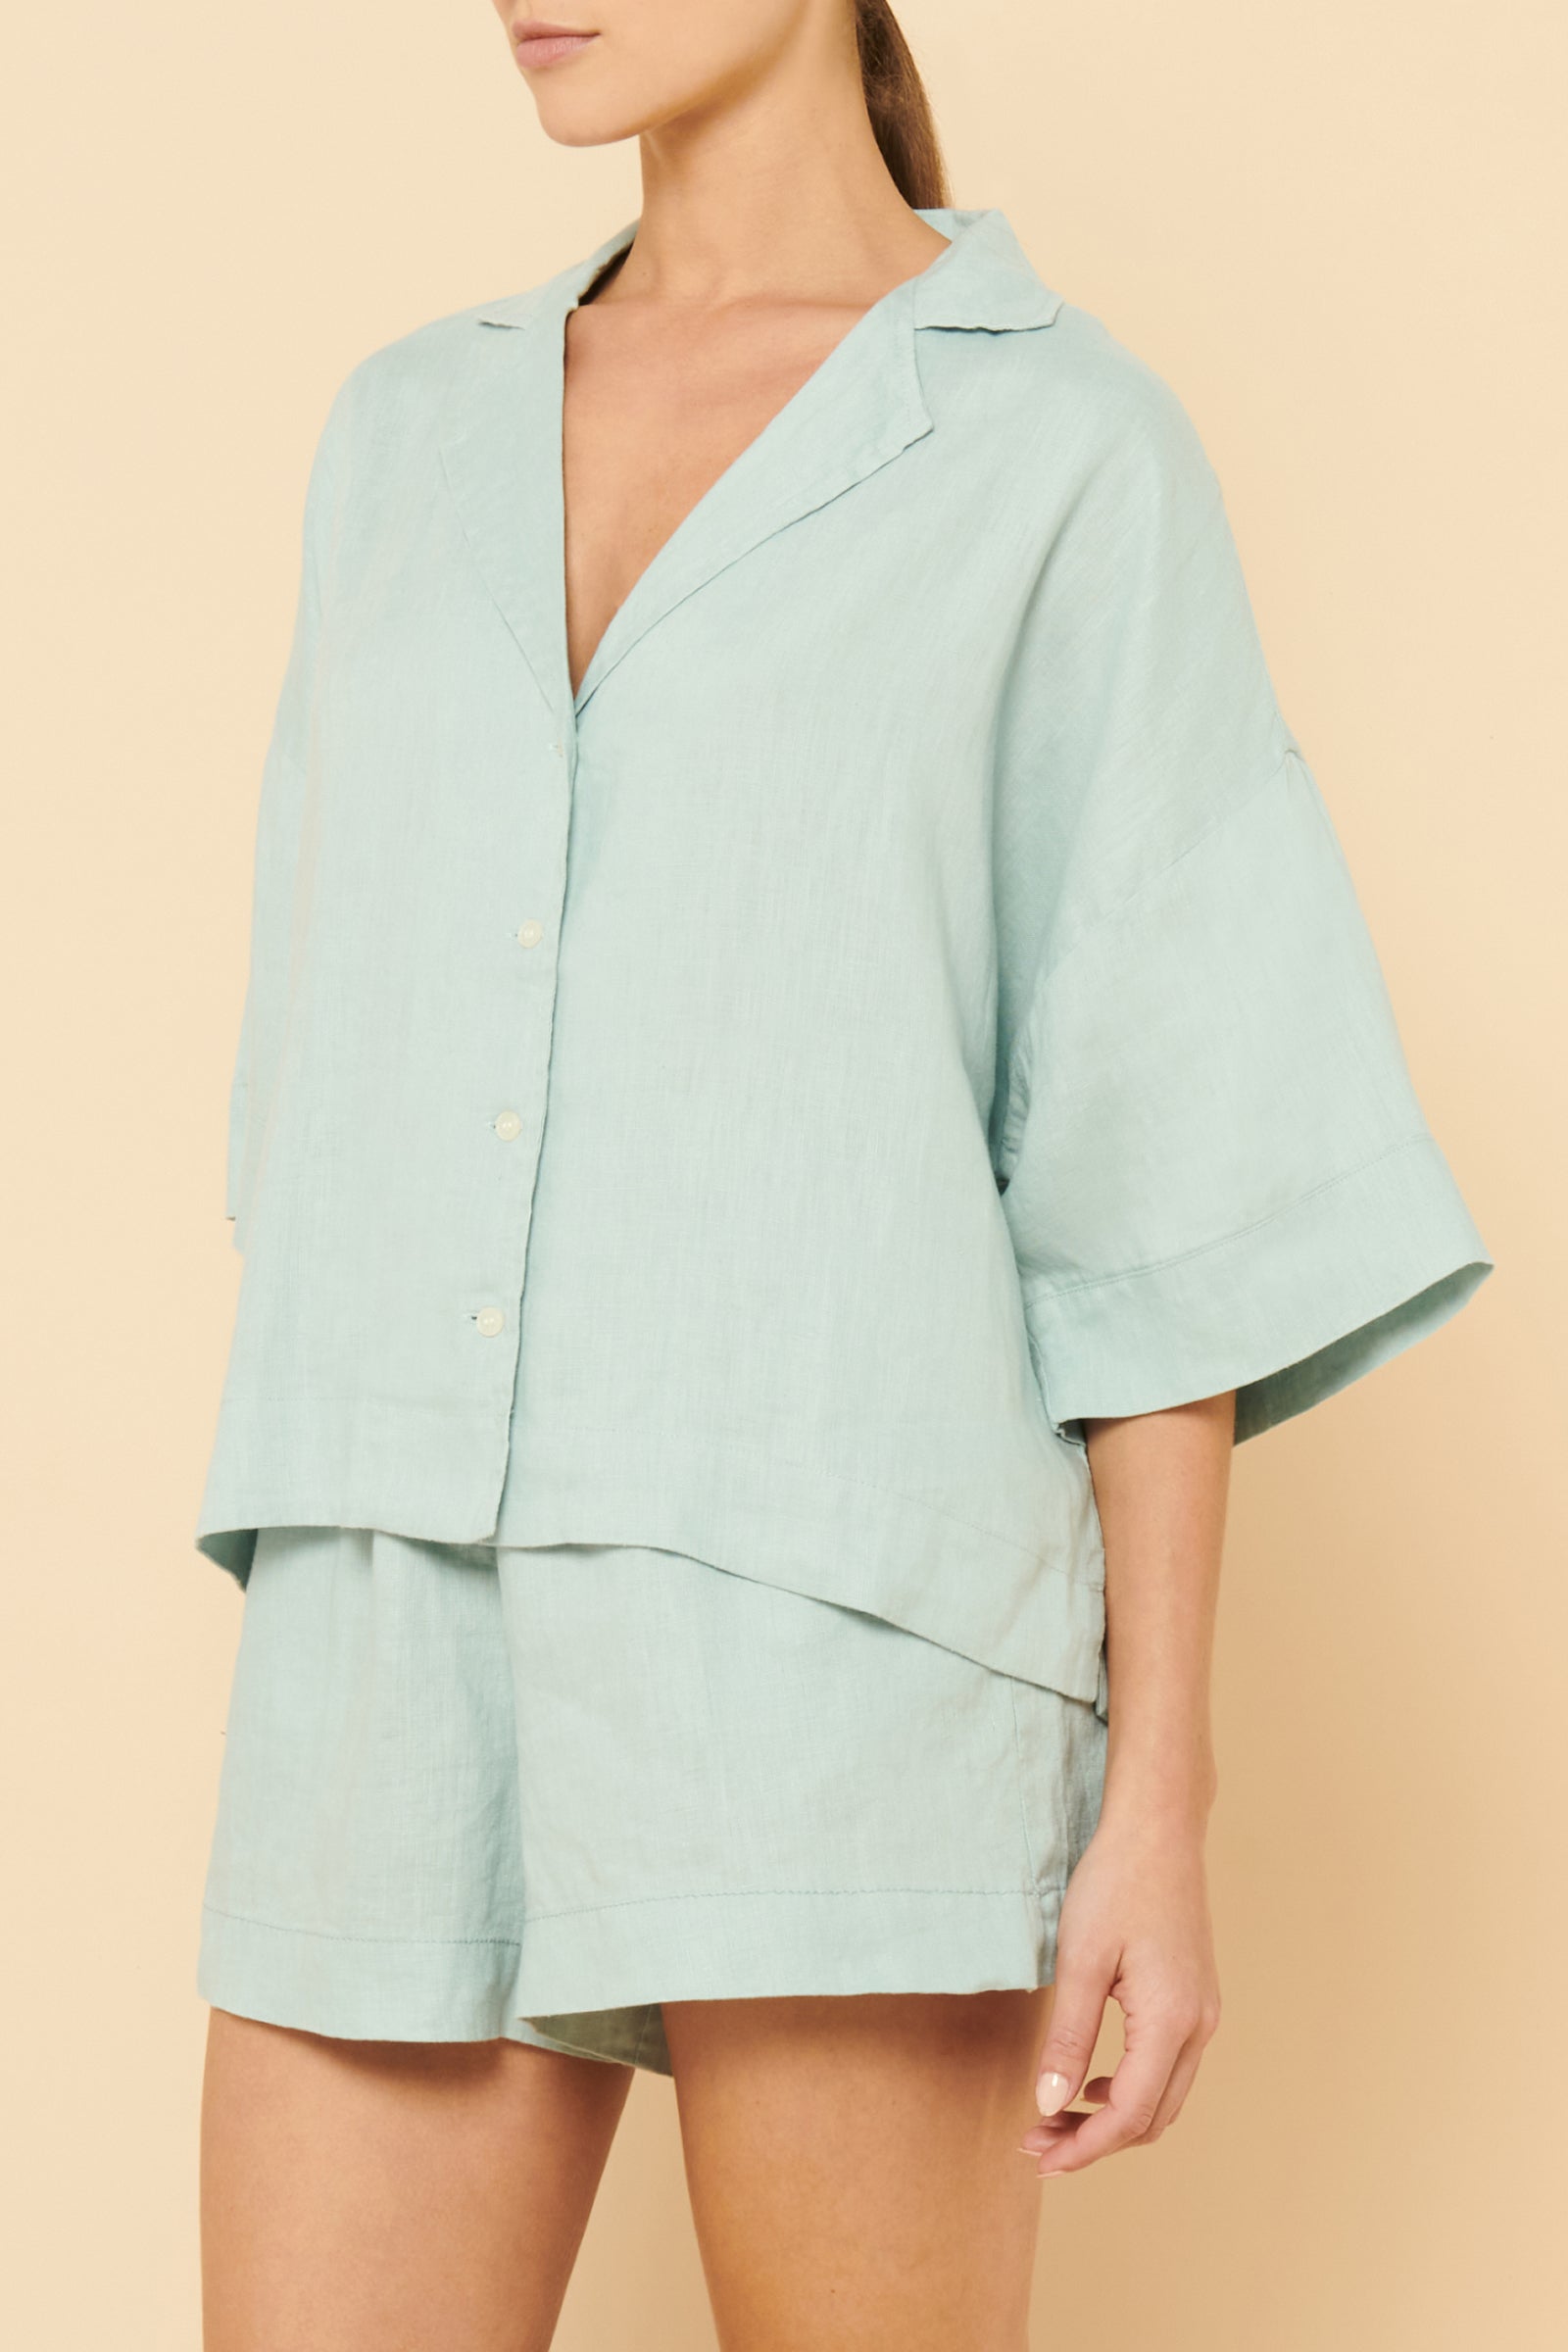 Nude Lucy Lounge Linen Shirt In a Blue Lagoon Colour